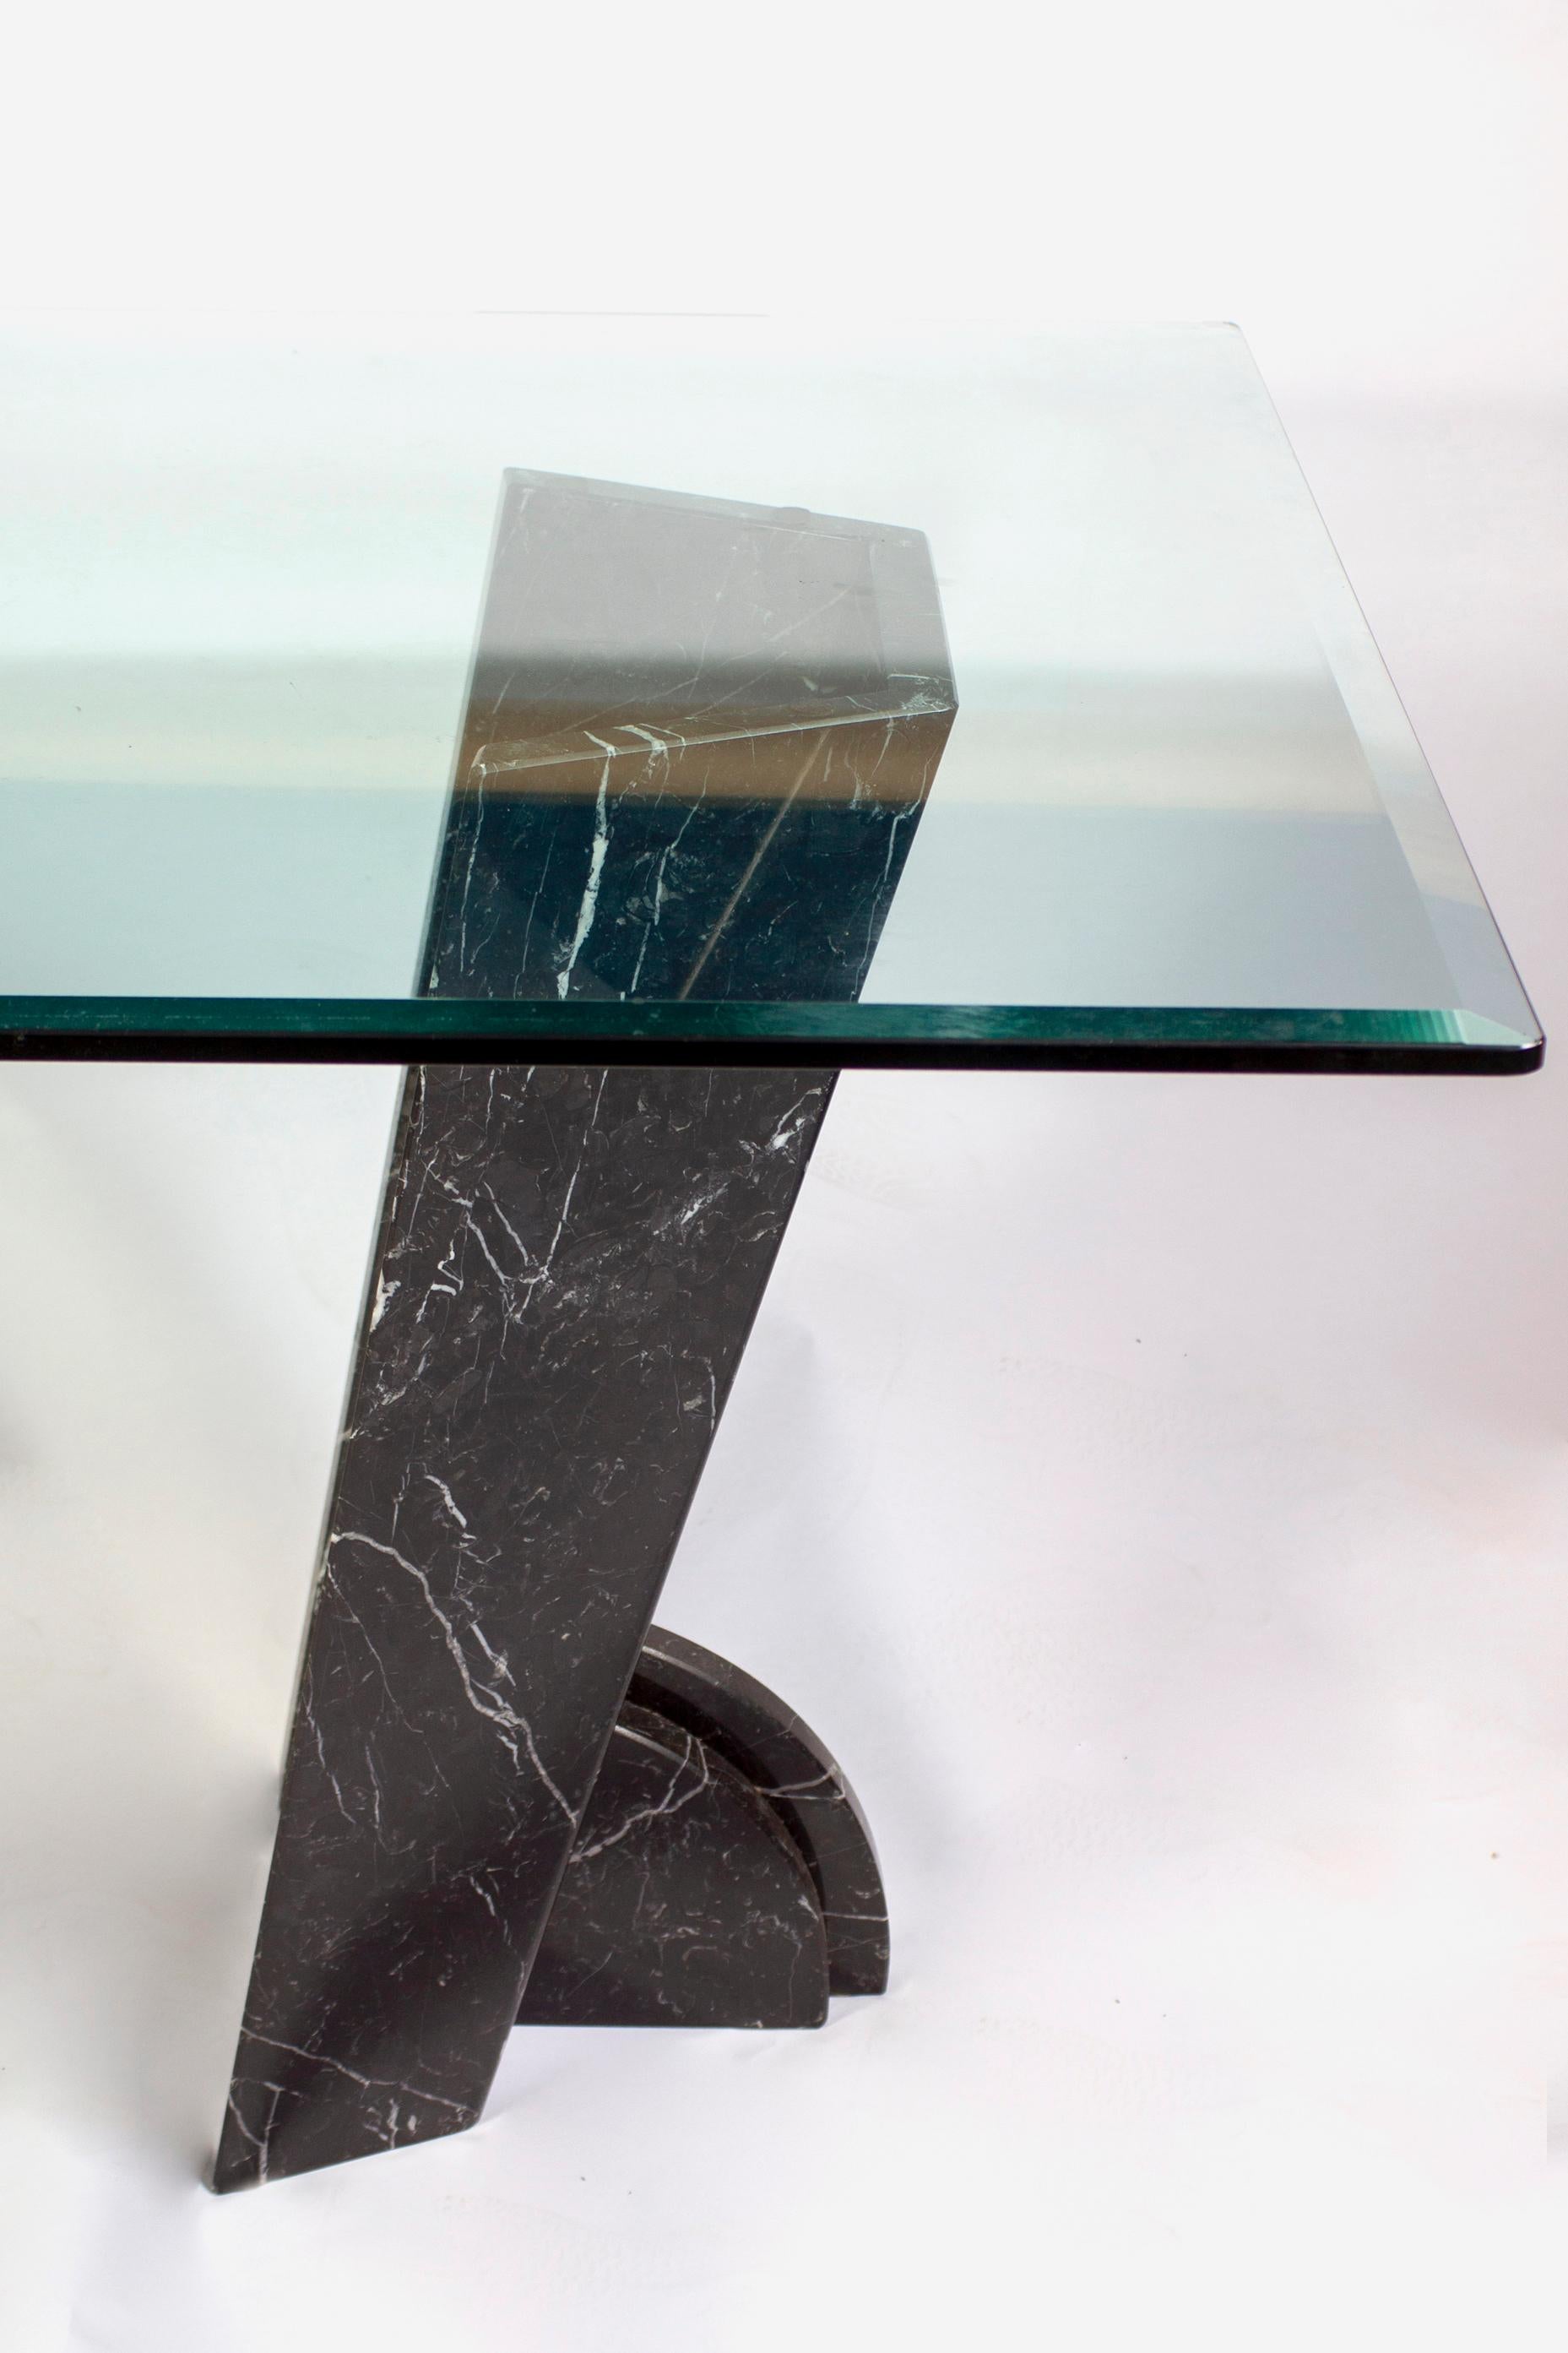 Italian Modern Rectangular Glass Dining Table with Marble Base 1970' For Sale